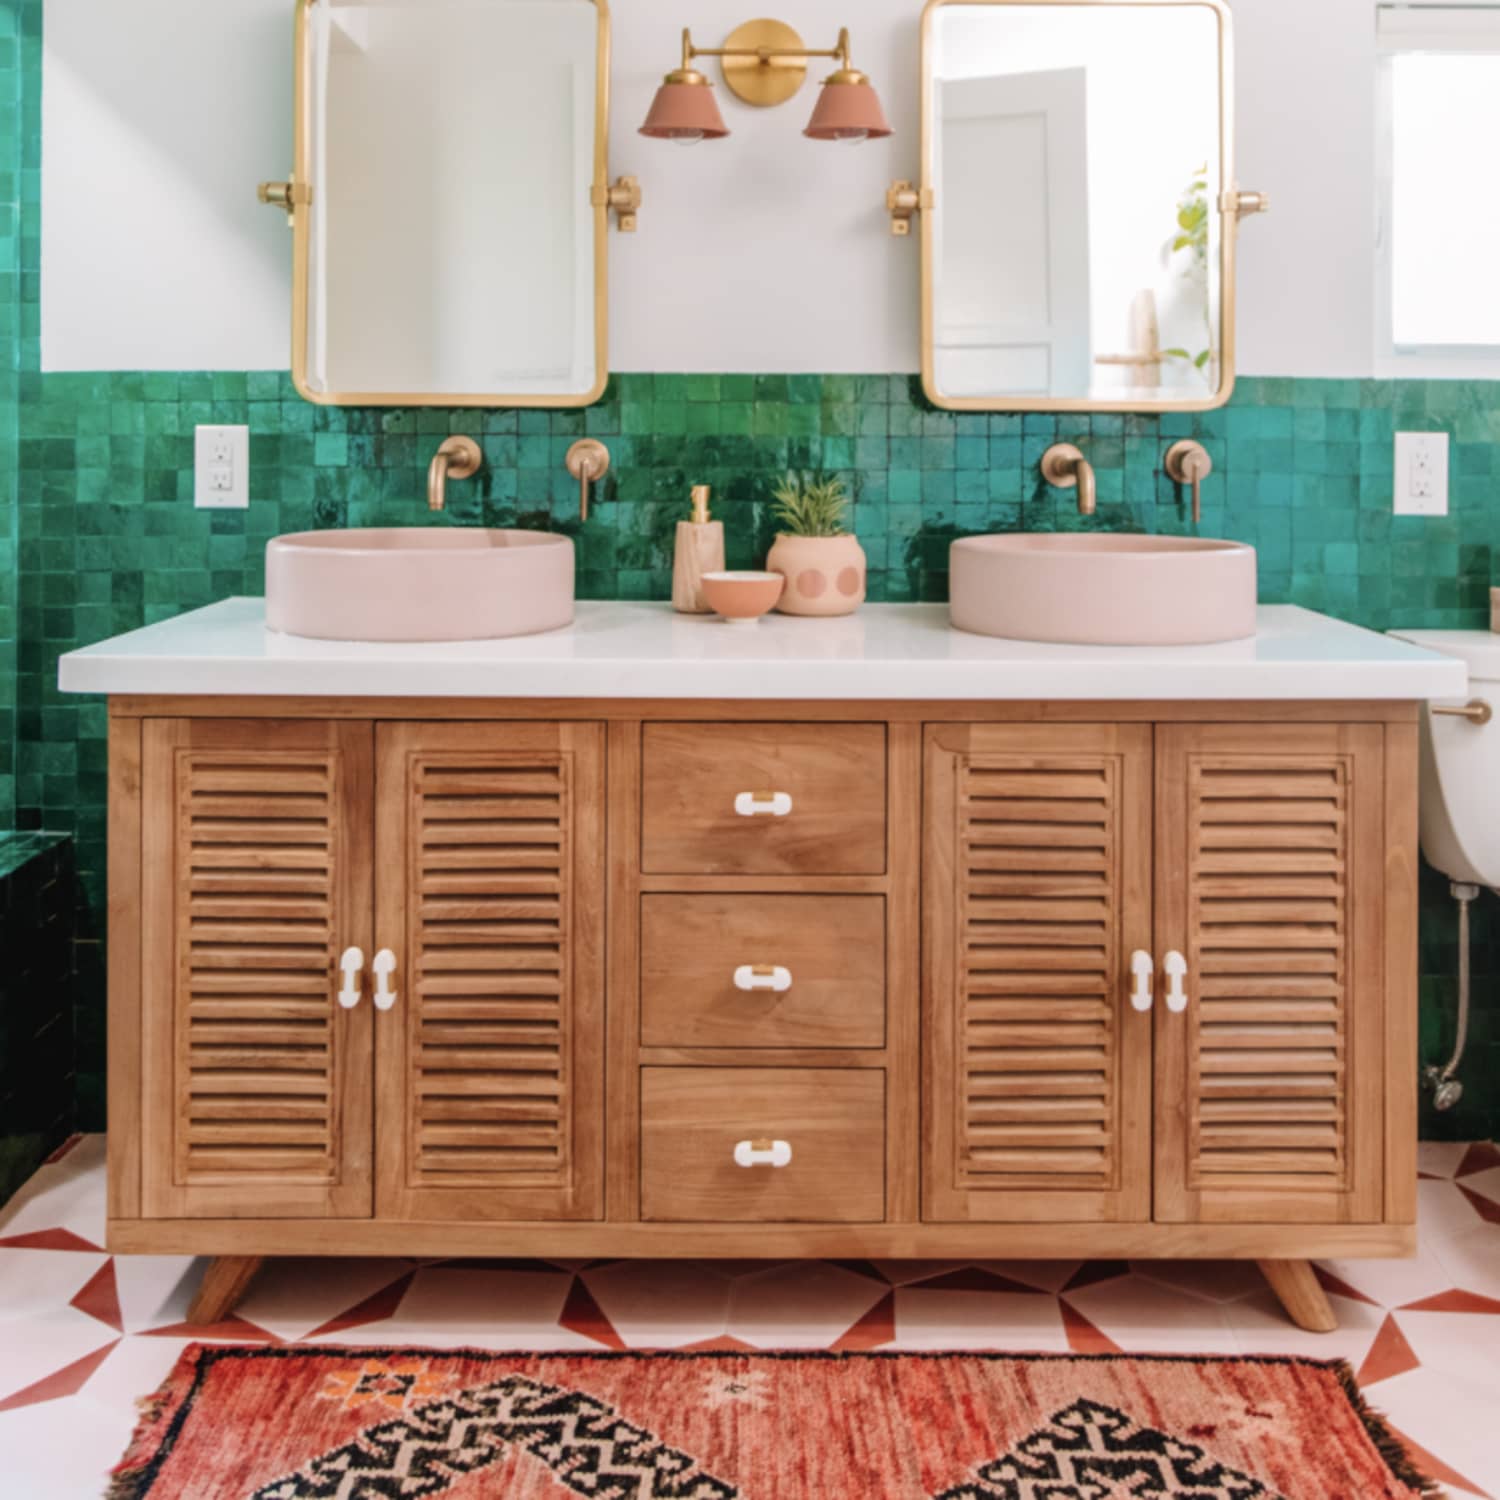 15 Bathroom Decor Colors and Palettes to Fit Your Style